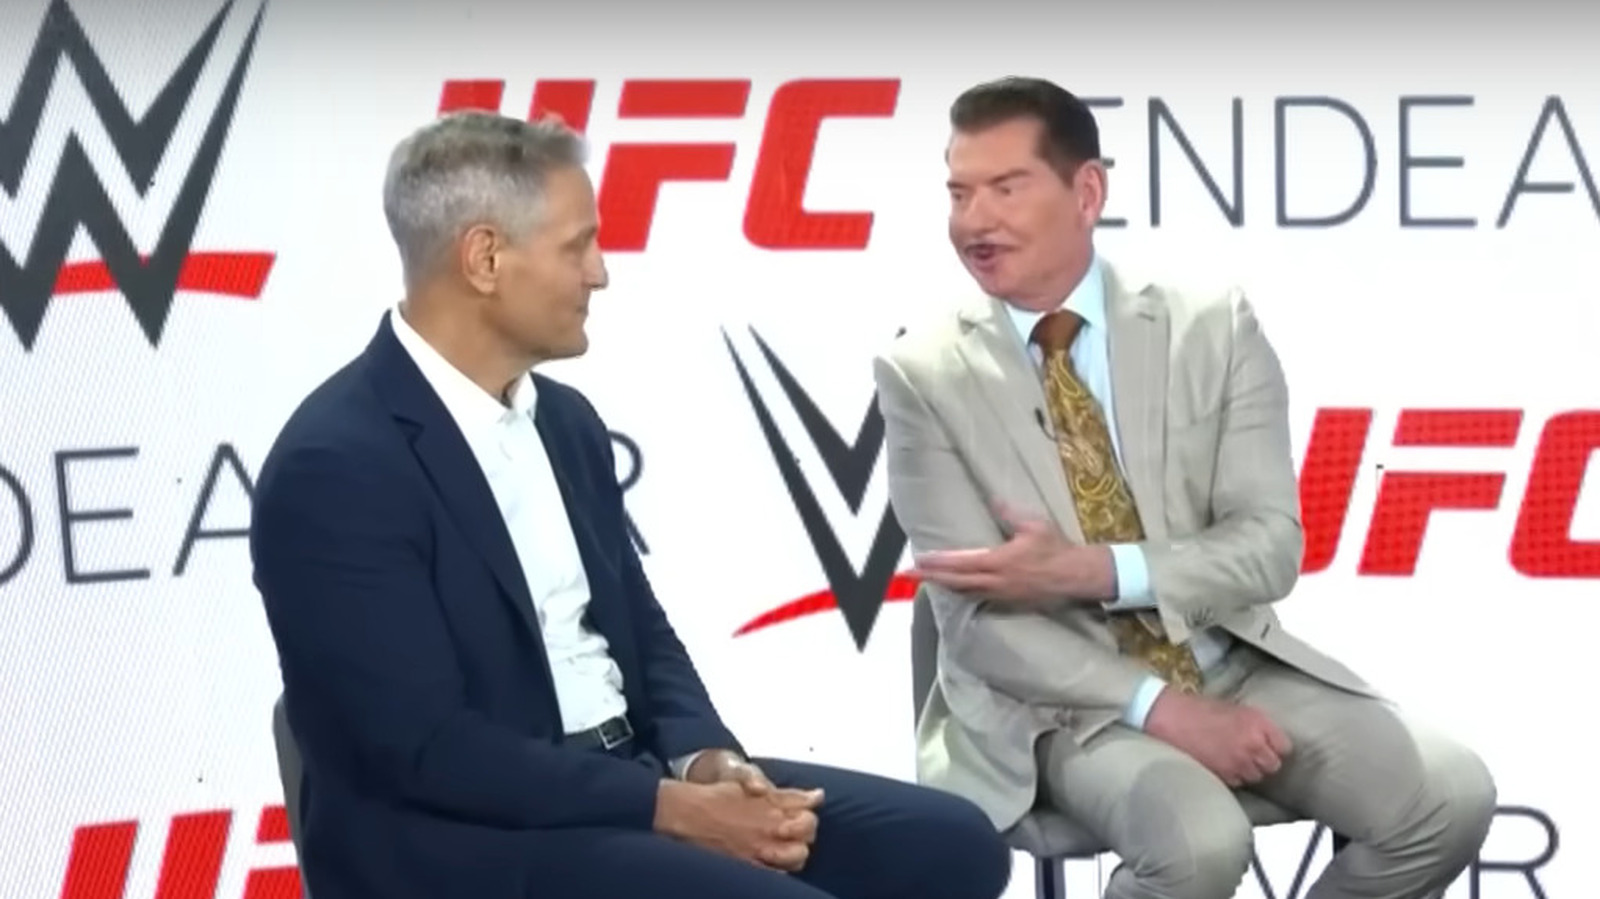 WWE-UFC Merger Officially Closes, Endeavor Announces Launch Of TKO Group Holdings